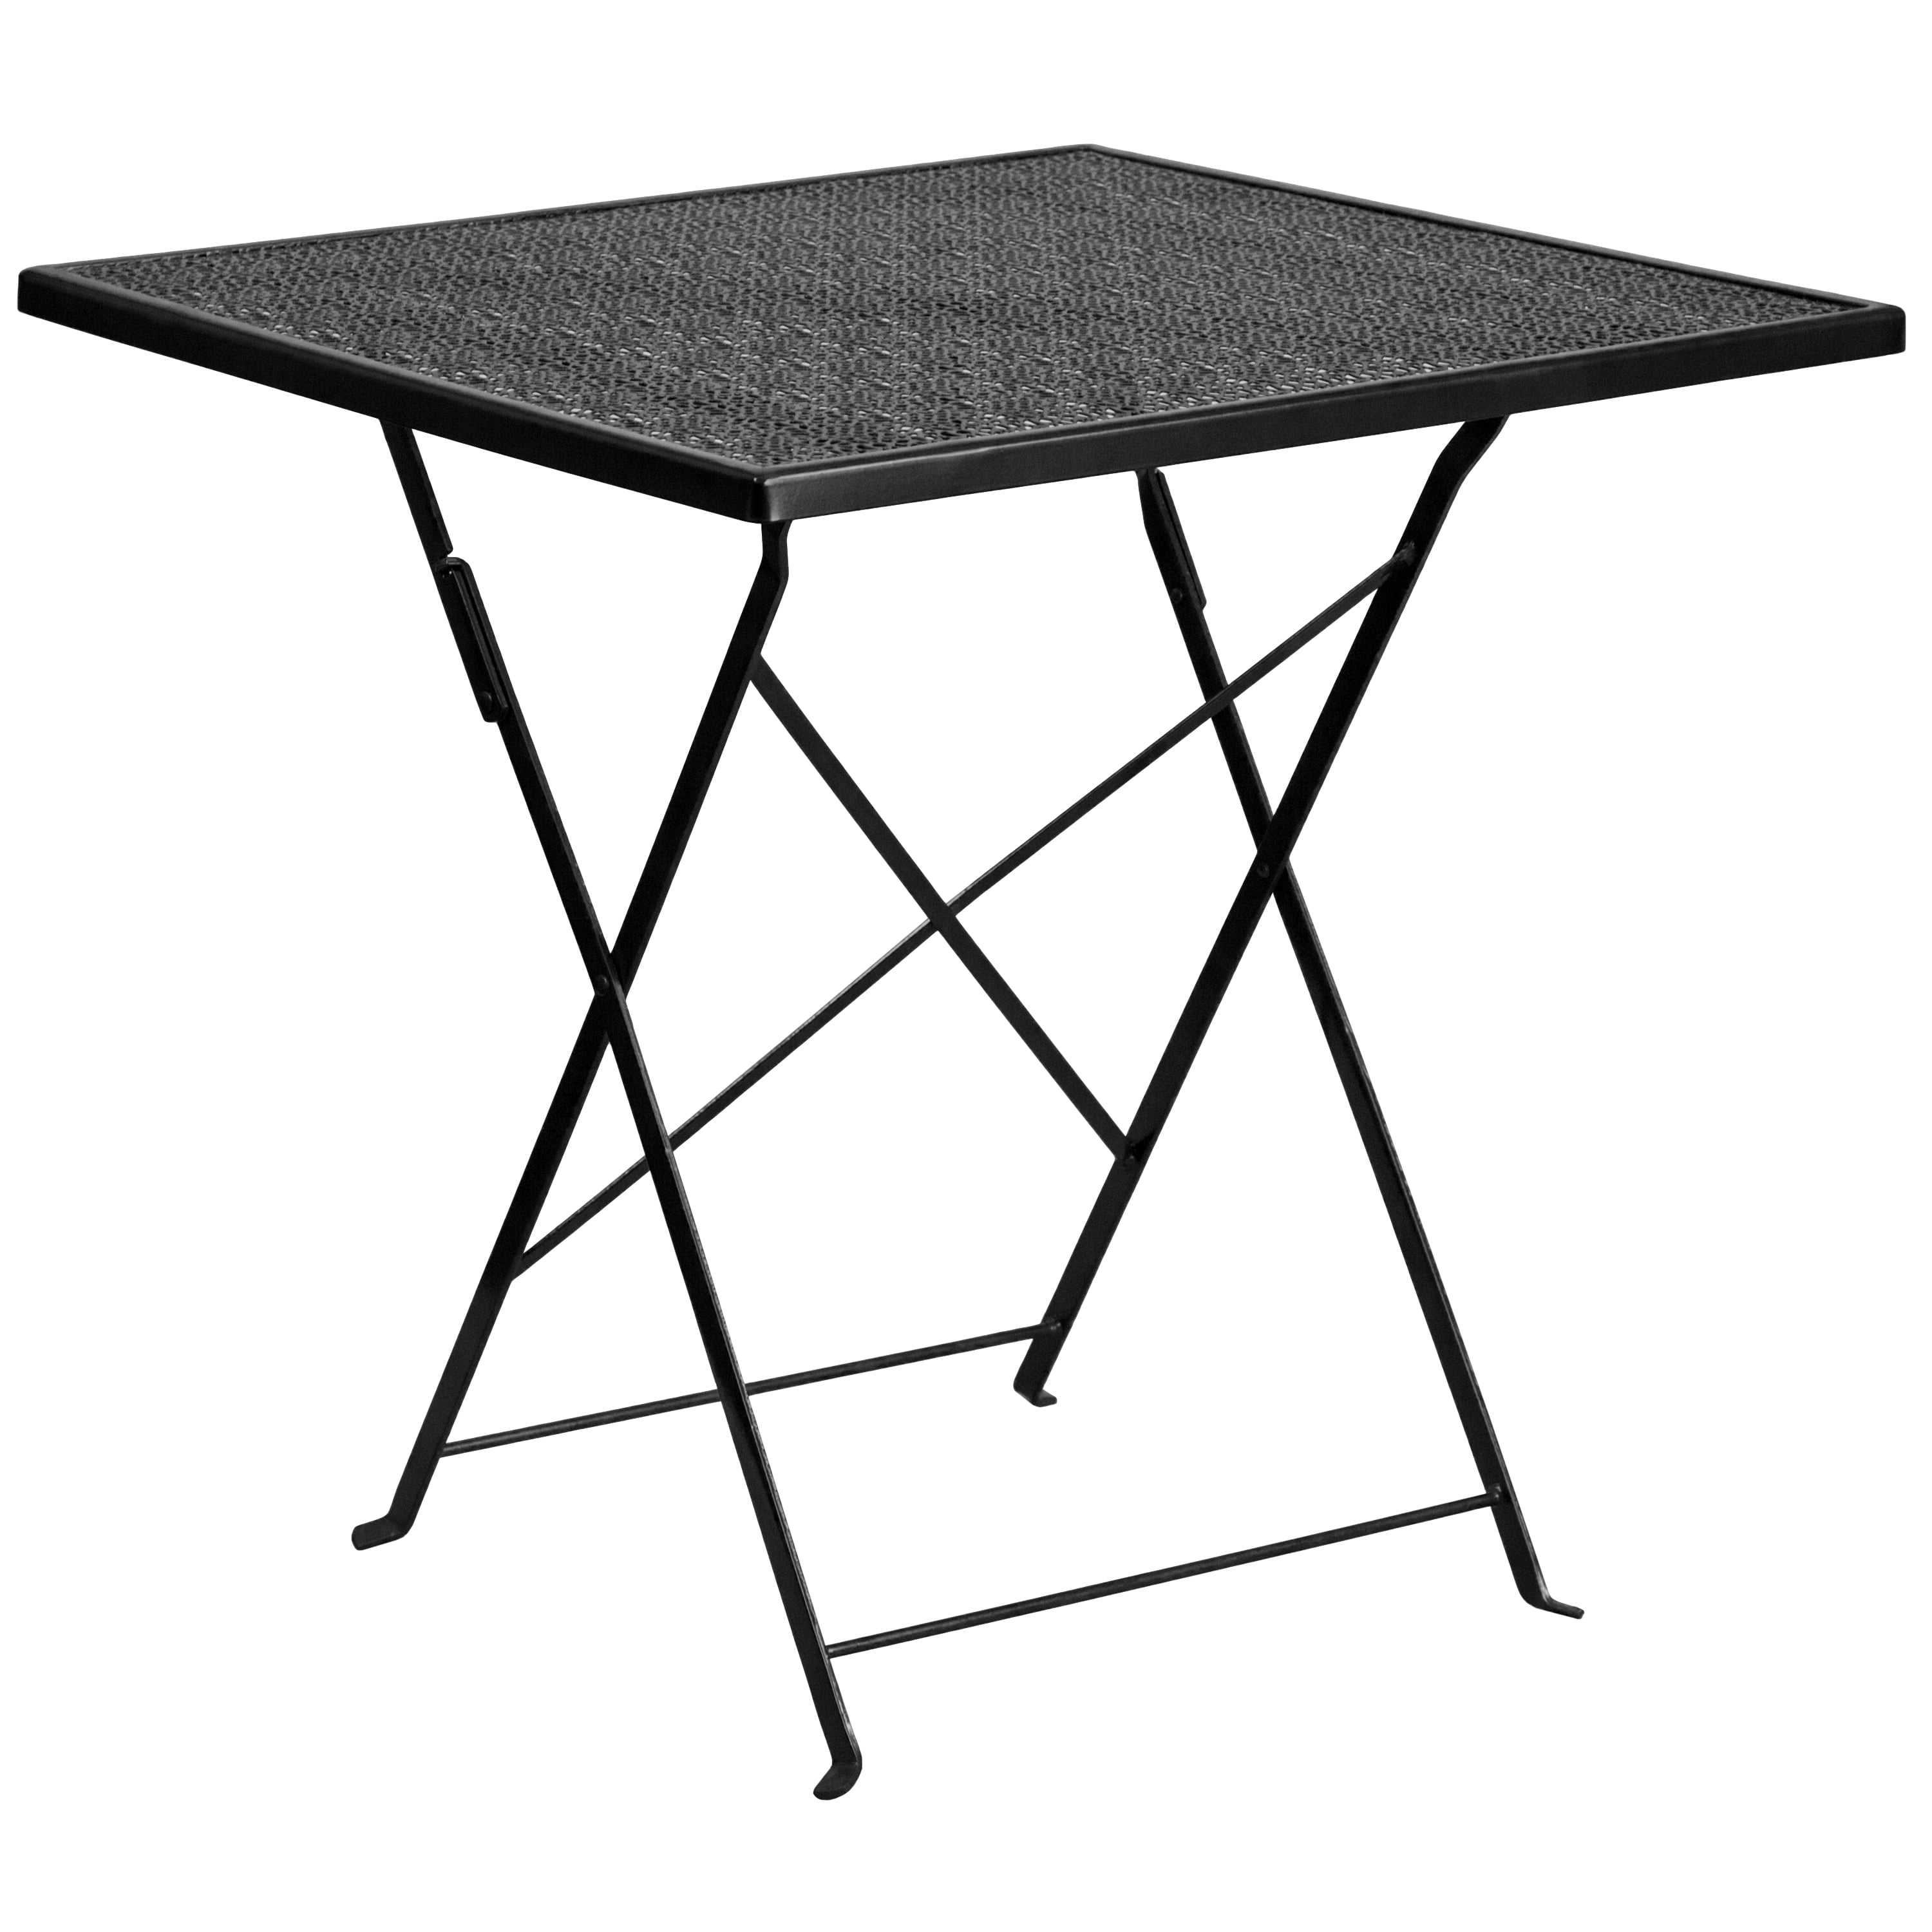 Flash Furniture Oia Commercial Grade 28" Square Black Indoor-Outdoor Steel Folding Patio Table Set with 2 Square Back Chairs - image 4 of 5